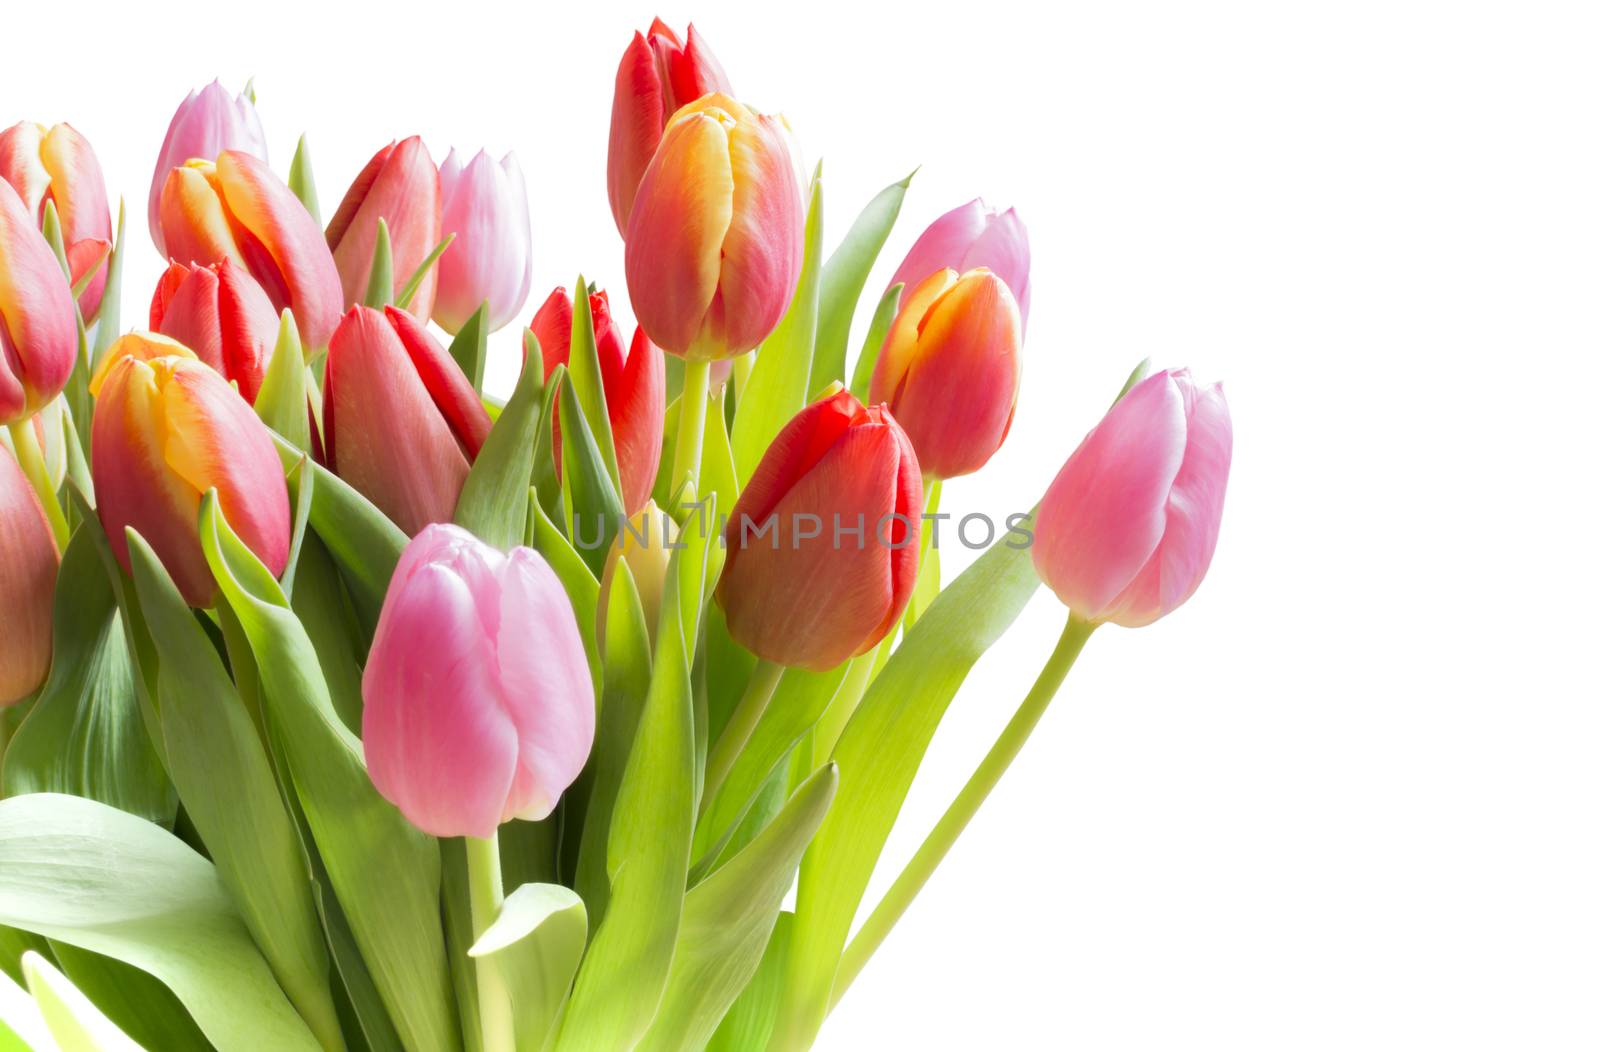 Spring tulips in a bouquet with pink, red and yellow flowers isolated on white.